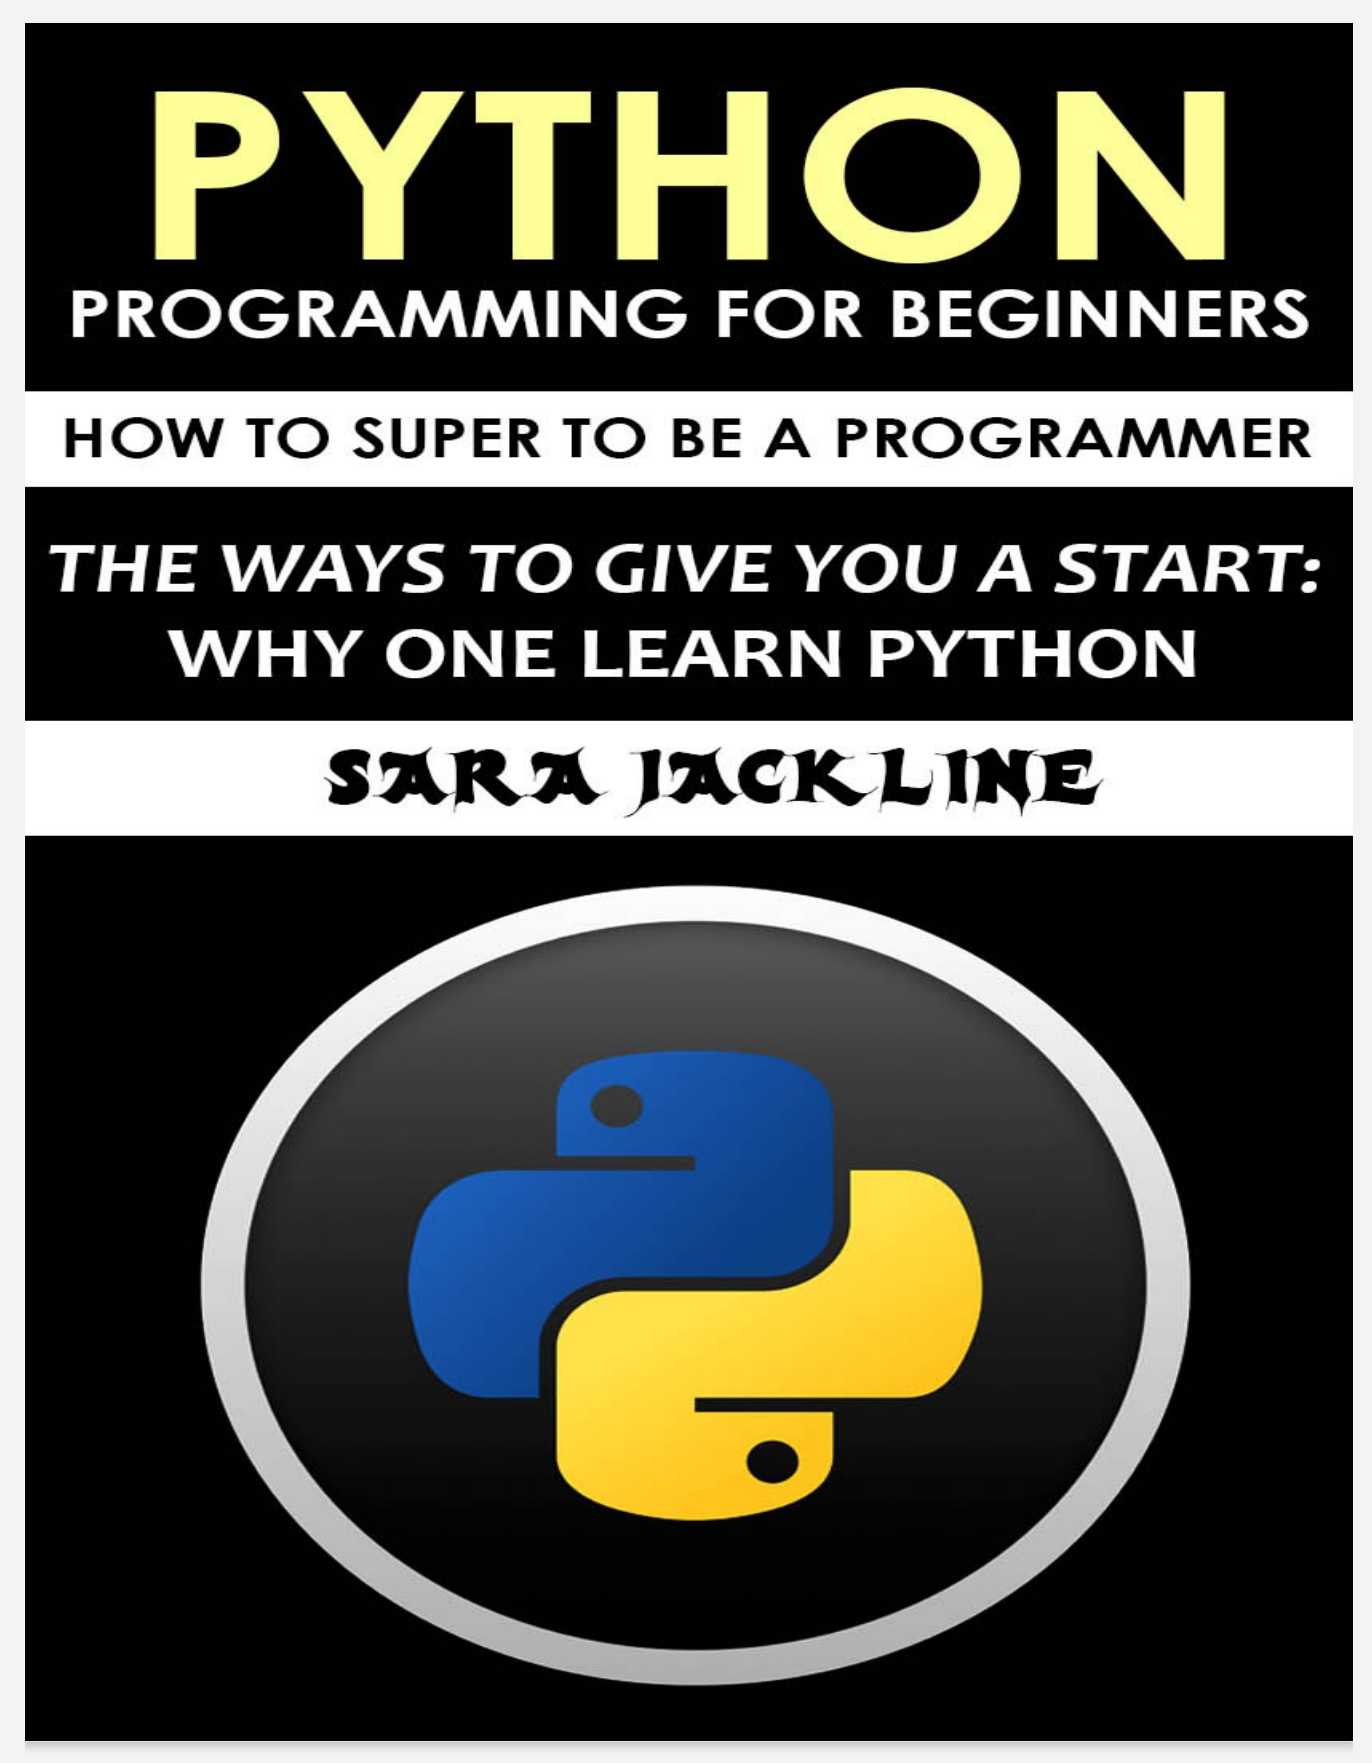 Python Programming For Beginners: How To Super To Be A Programmer: The Ways To Give You A Start: Why One Learn Python